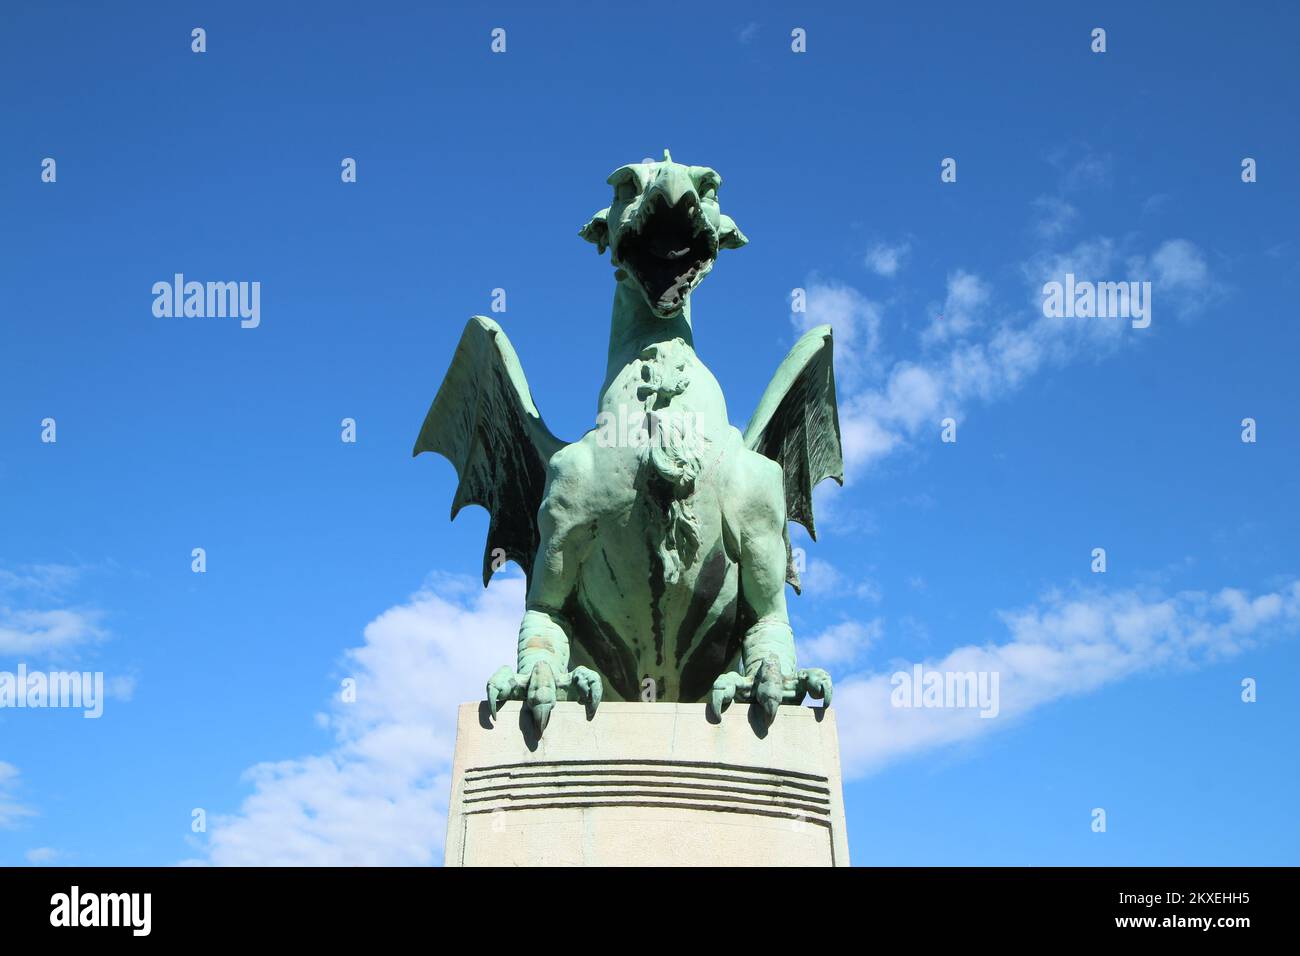 Dragon statue standing on the Dragon bridge in Ljubljana in Slovenia during the nice and sunny day. Stock Photo